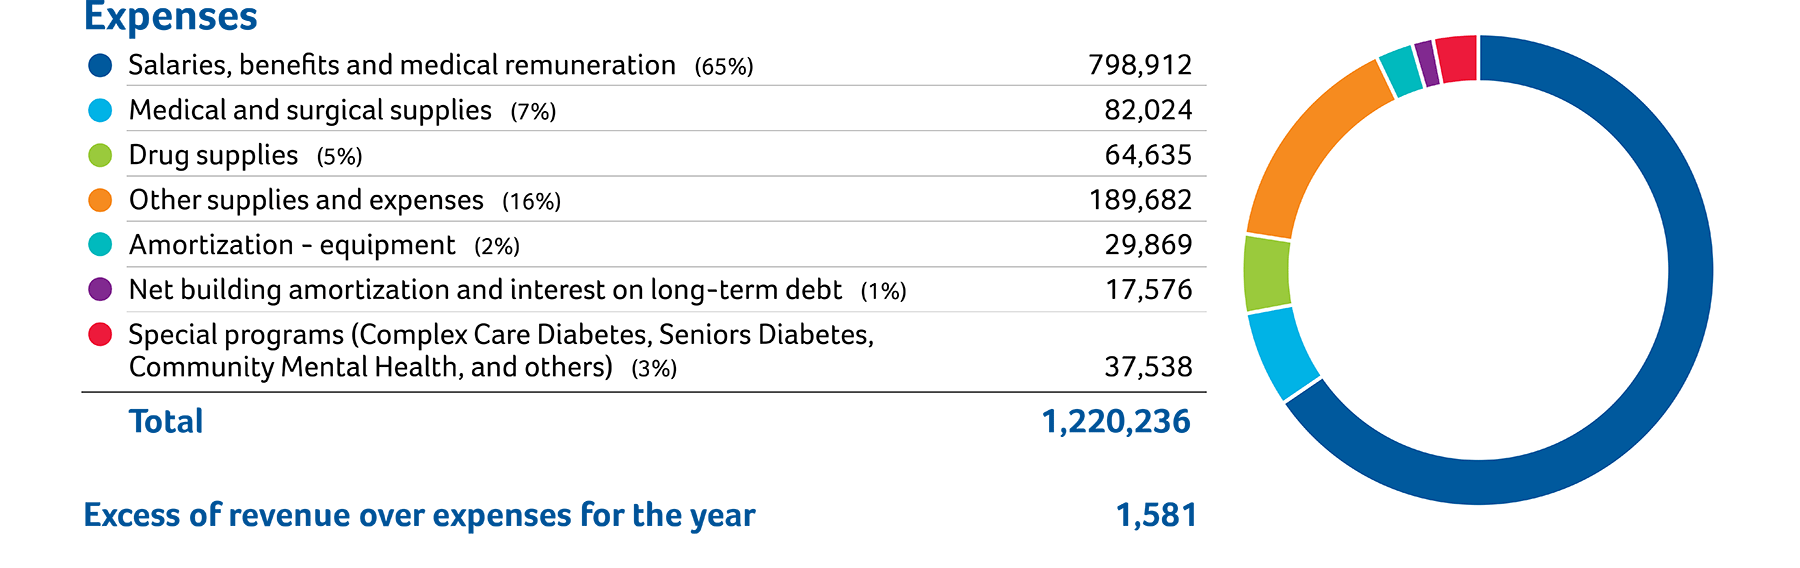 2019/20 Expenses (in thousands of dollars): Salaries, benefits and medical remuneration (65%) $798,912. Medical and Surgical supplies (7%) $82,024. Drug supplies (5%) $64,635. Other supplies and expenses (16%) $189,682. Amortization – equipment (2%) $29,869. Net building amortization and interest on long-term debt (1%) $17,576. Special programs (Complex Care Diabetes, Seniors Diabetes, Community Mental Health, and others (3%) $37,538. TOTAL: $1,220,236. Excess of revenue over expenses for the year: $1,581